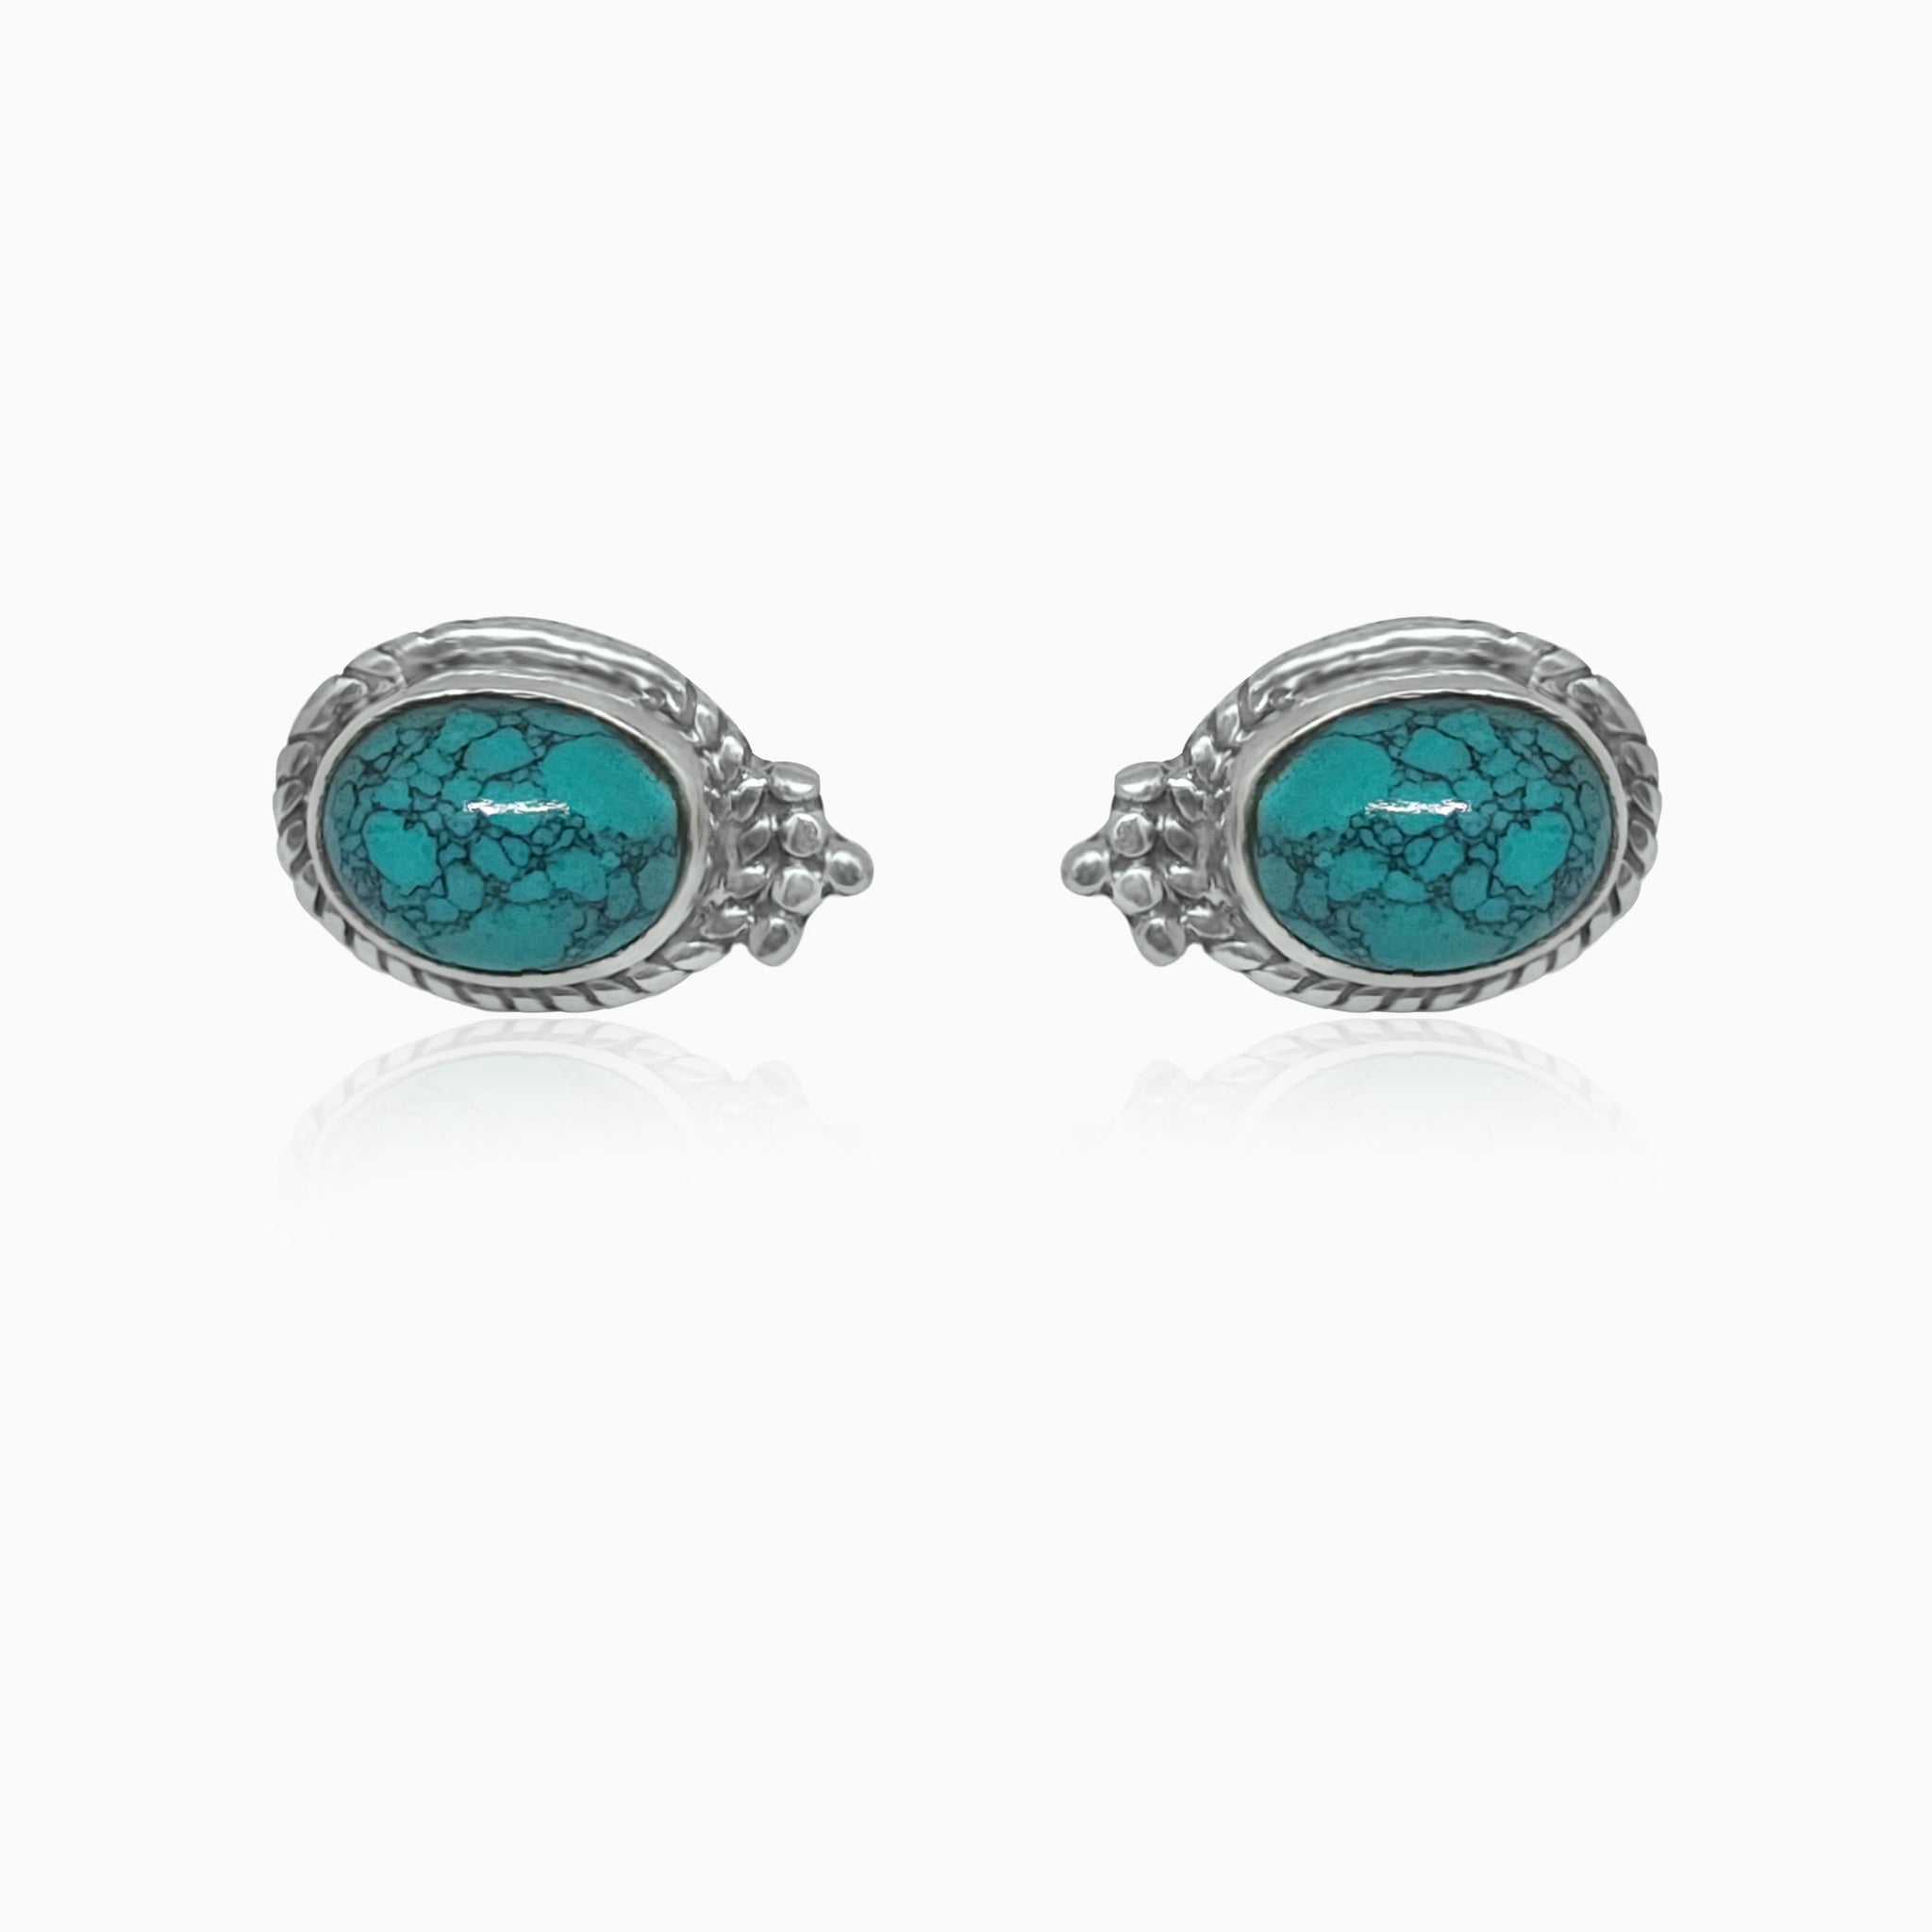 Silver Royal Turquoise Earrings